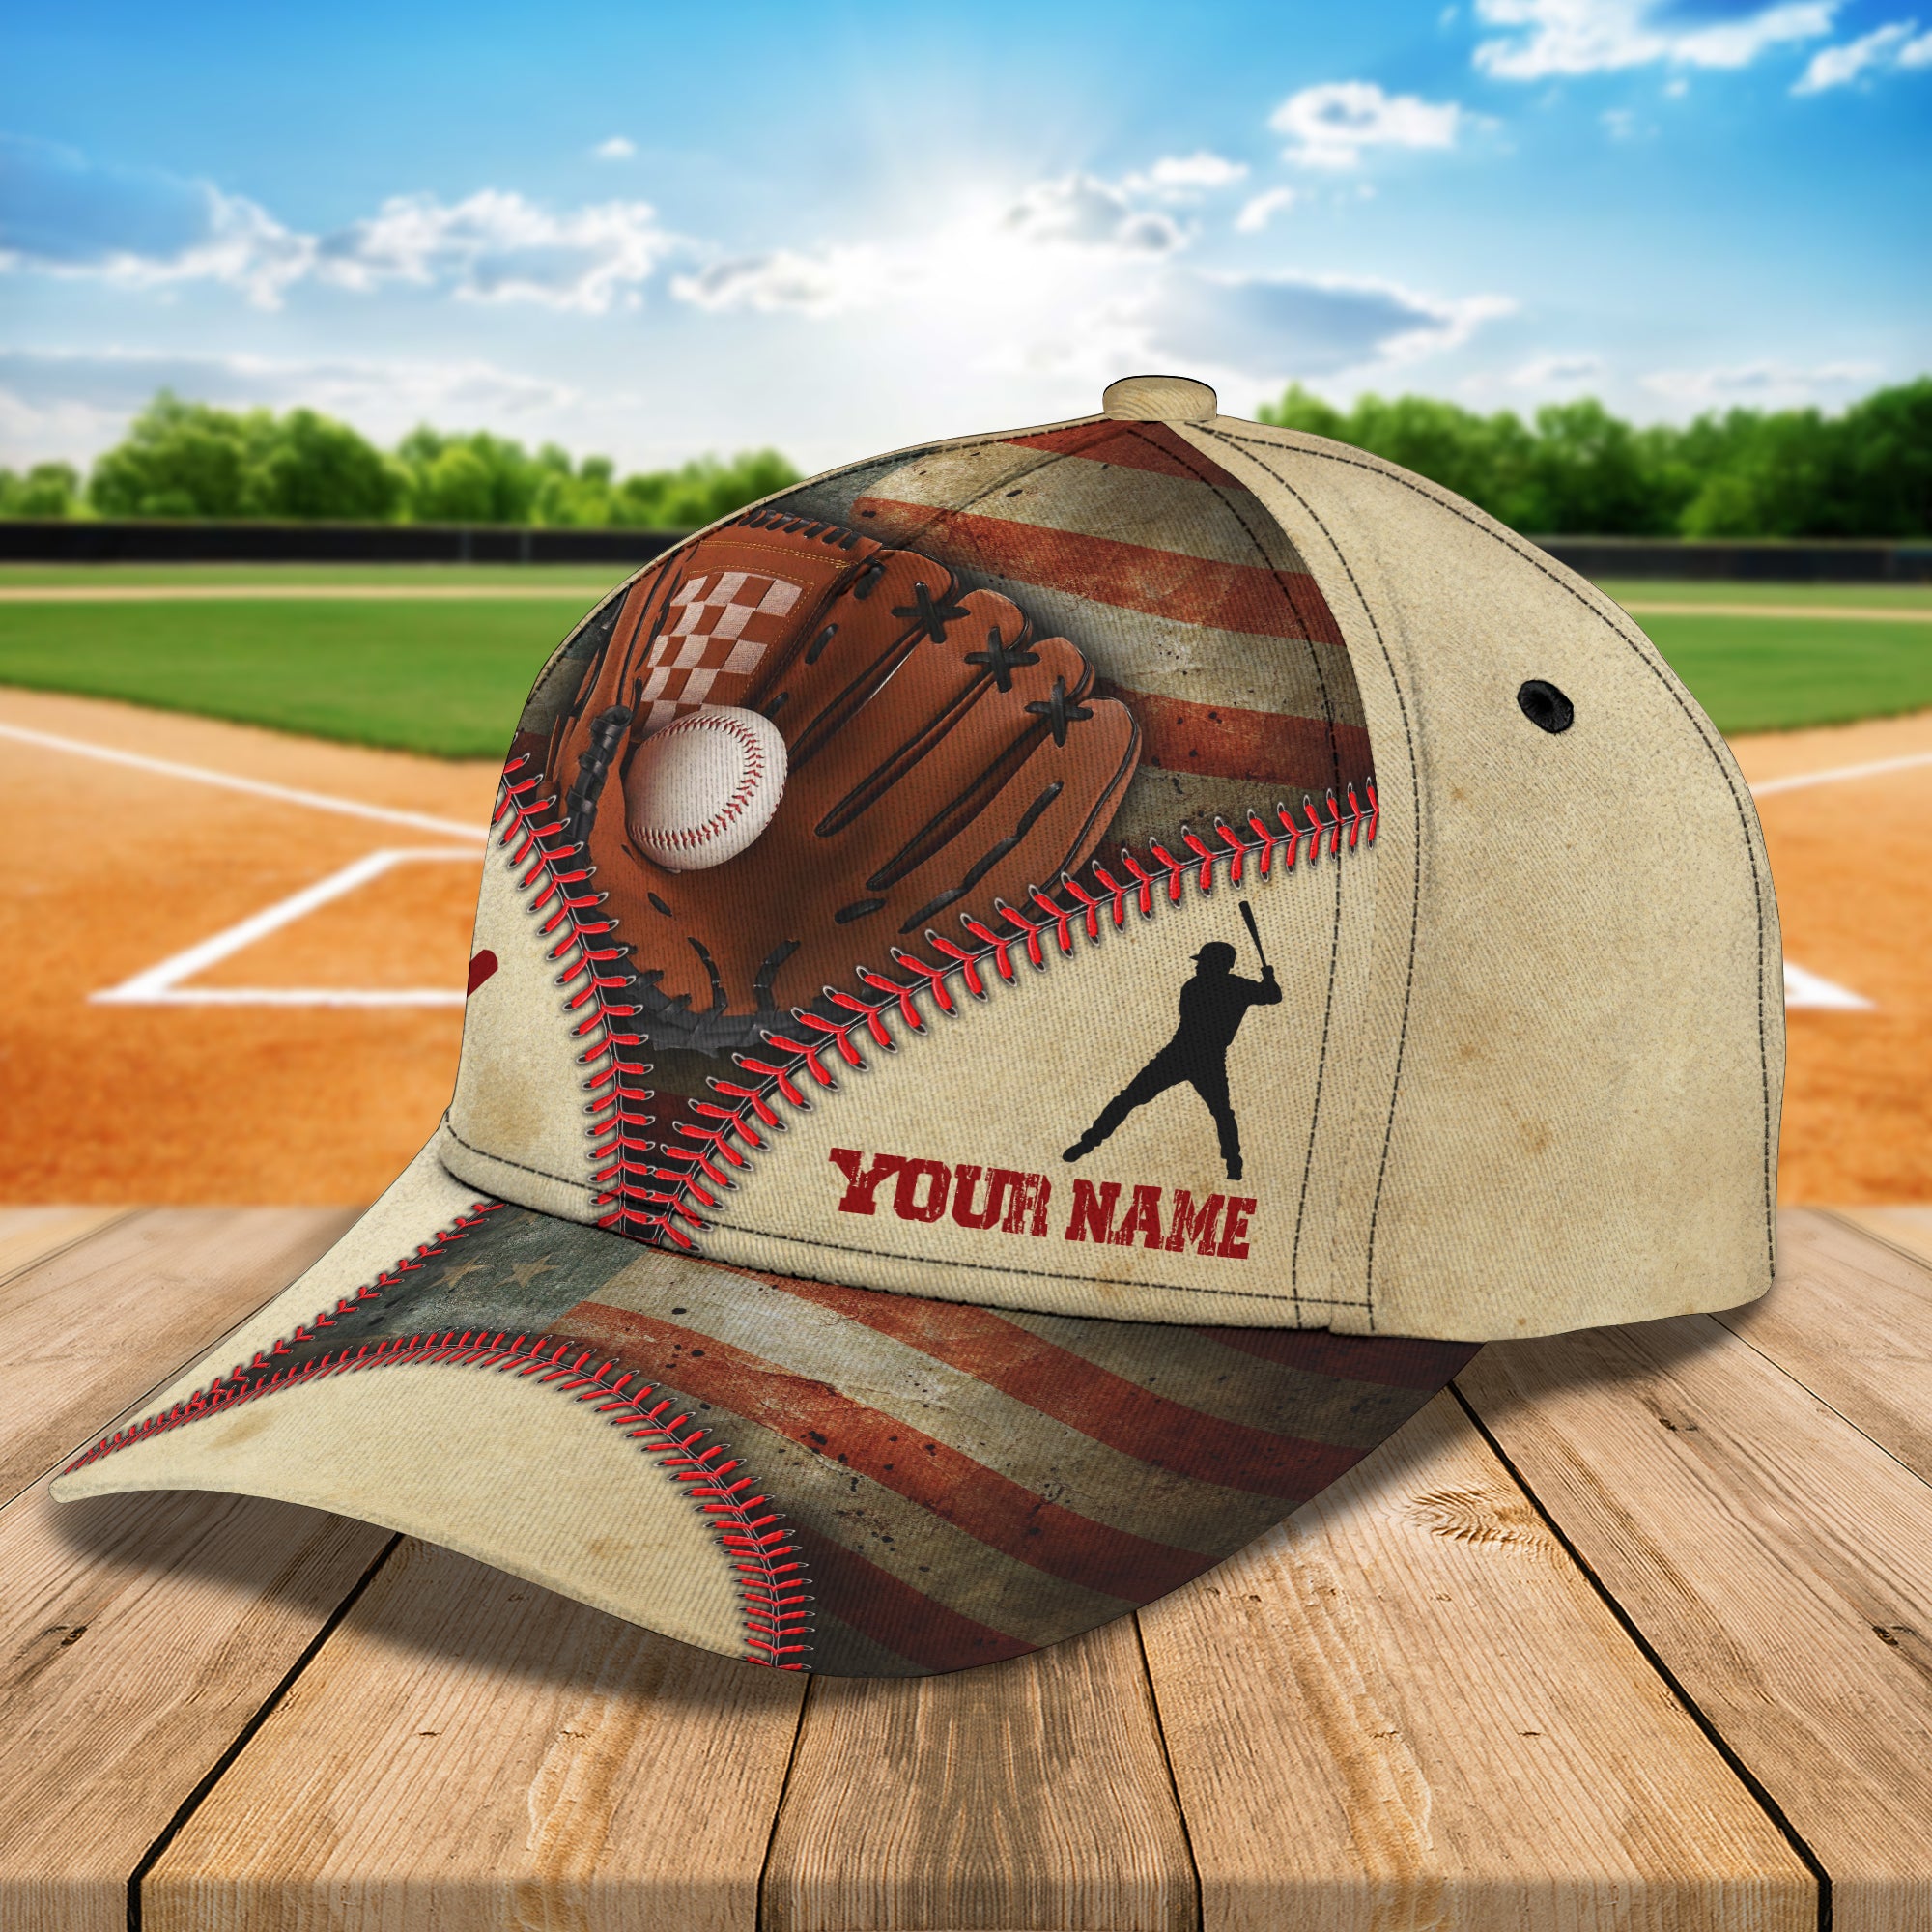 Baseball - Personalized Name Cap - Lst149